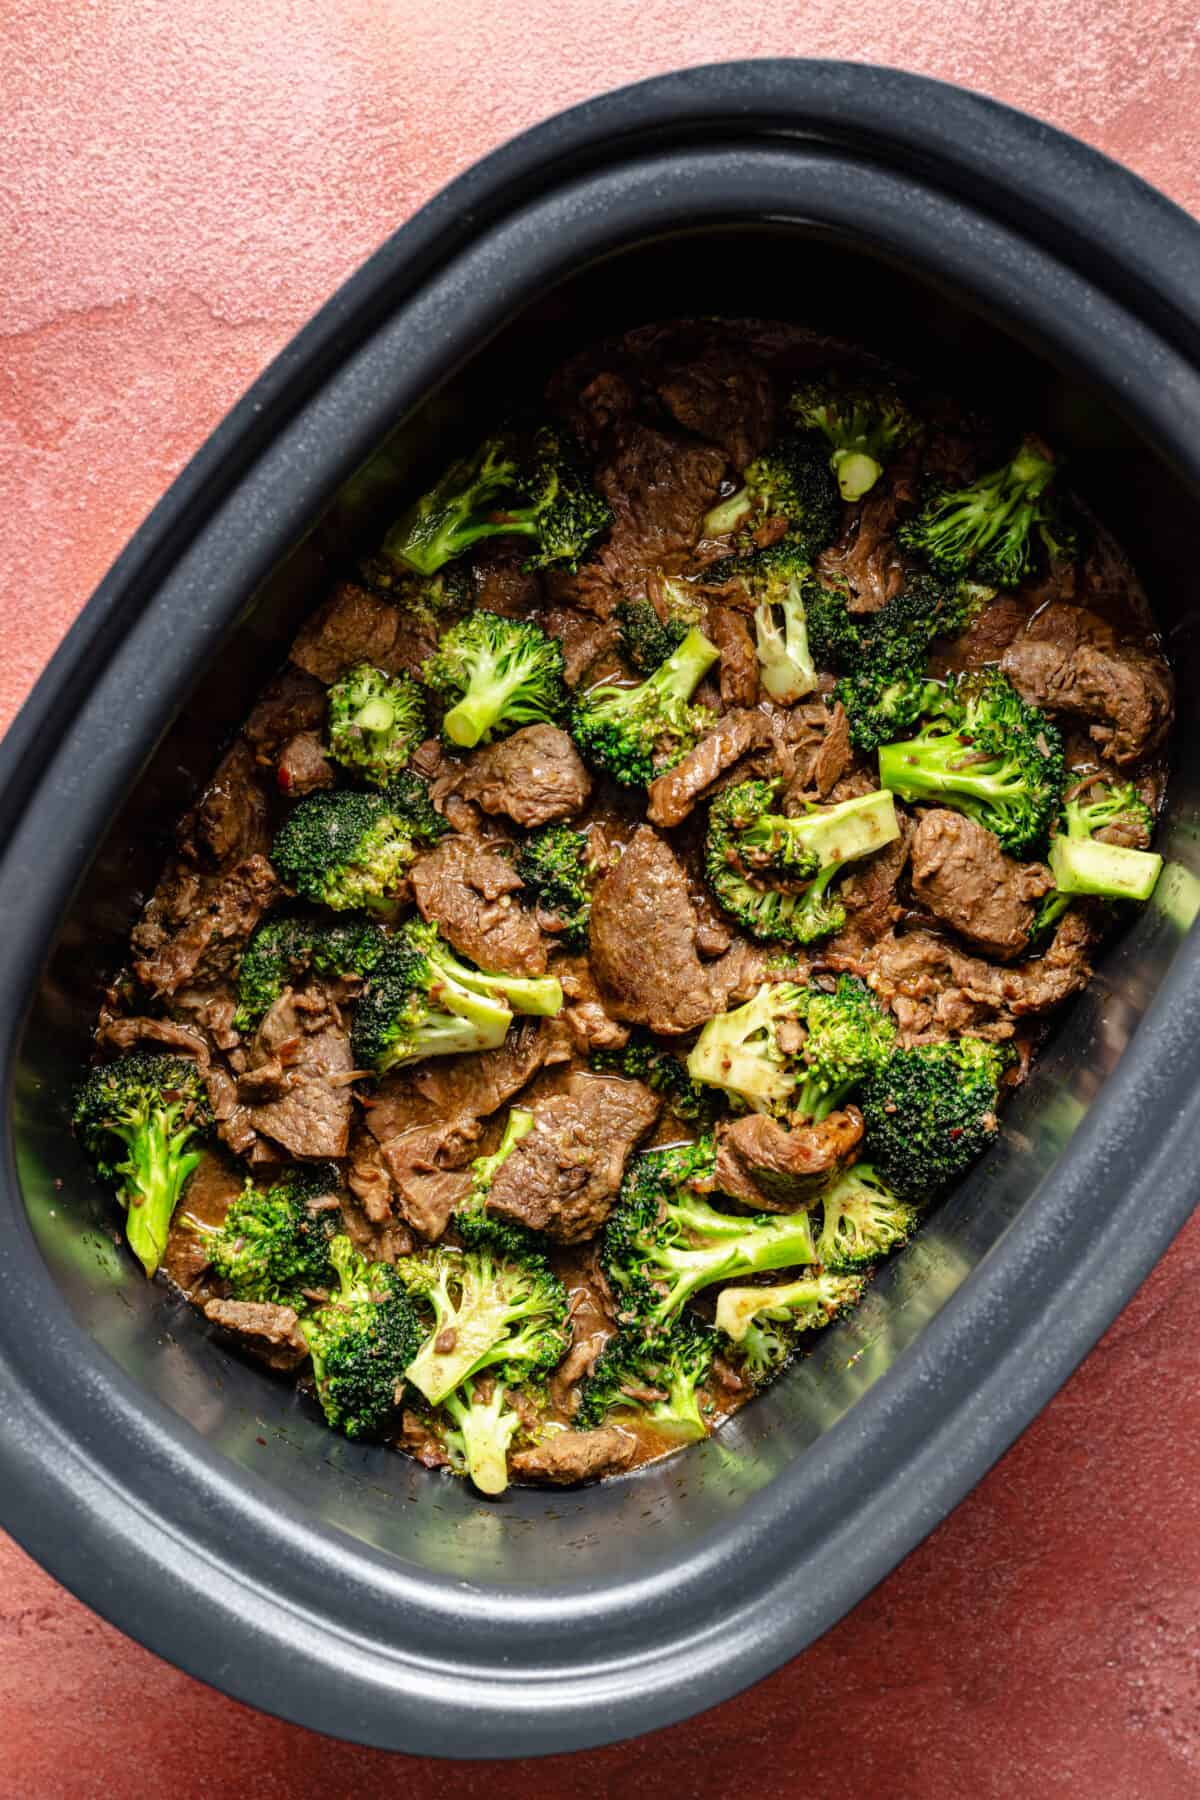 Cooked beef and broccoli in slow cooker.